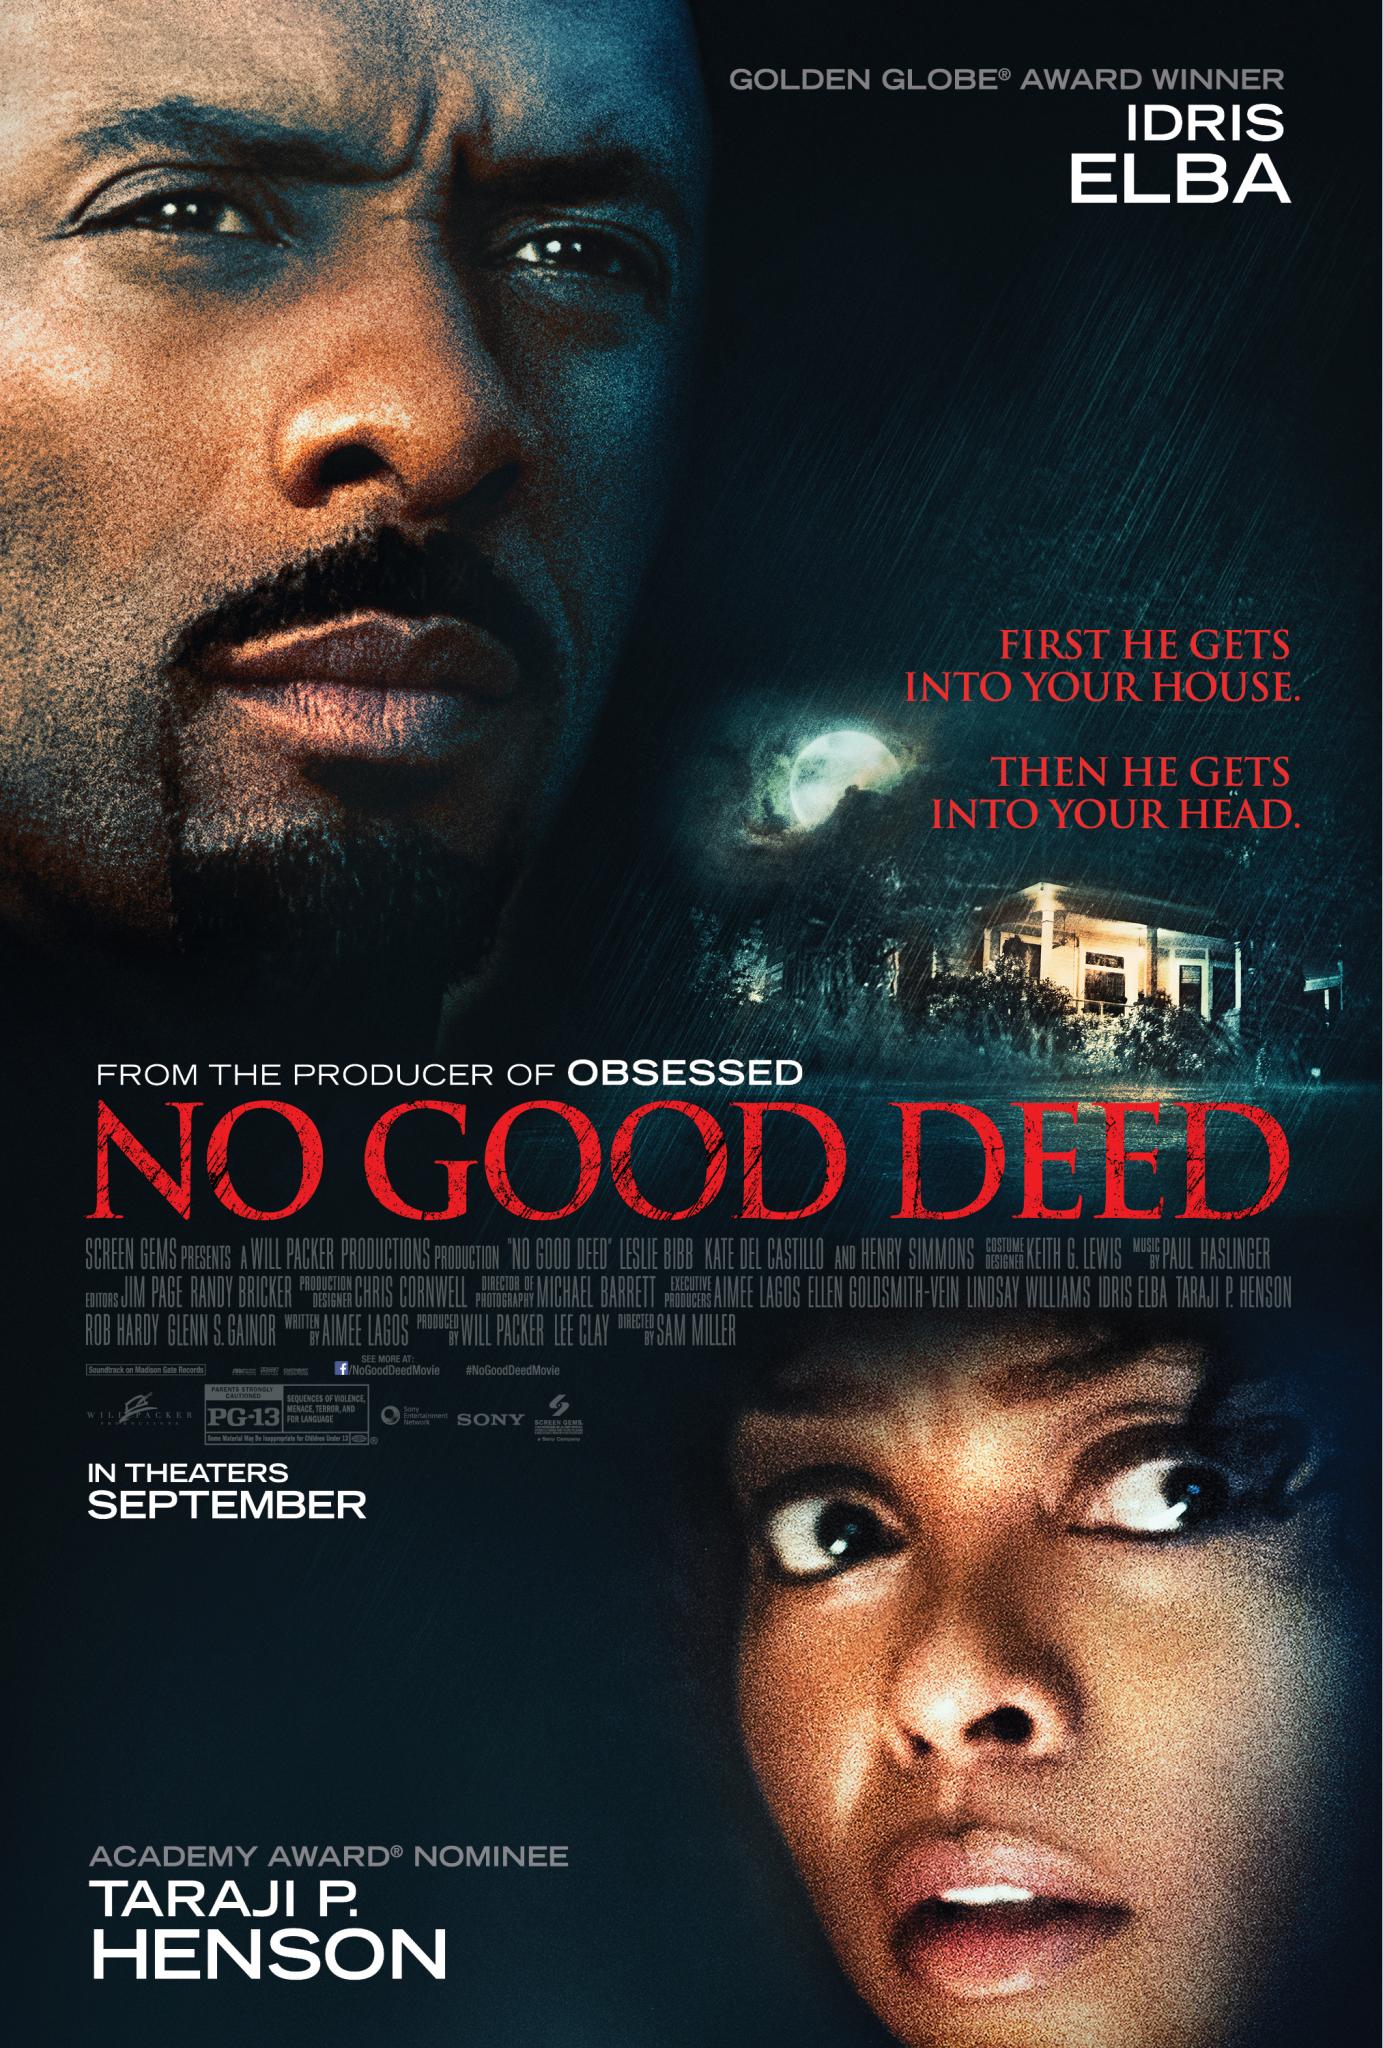 'No Good Deed' Earns Number One Spot at the Box Office